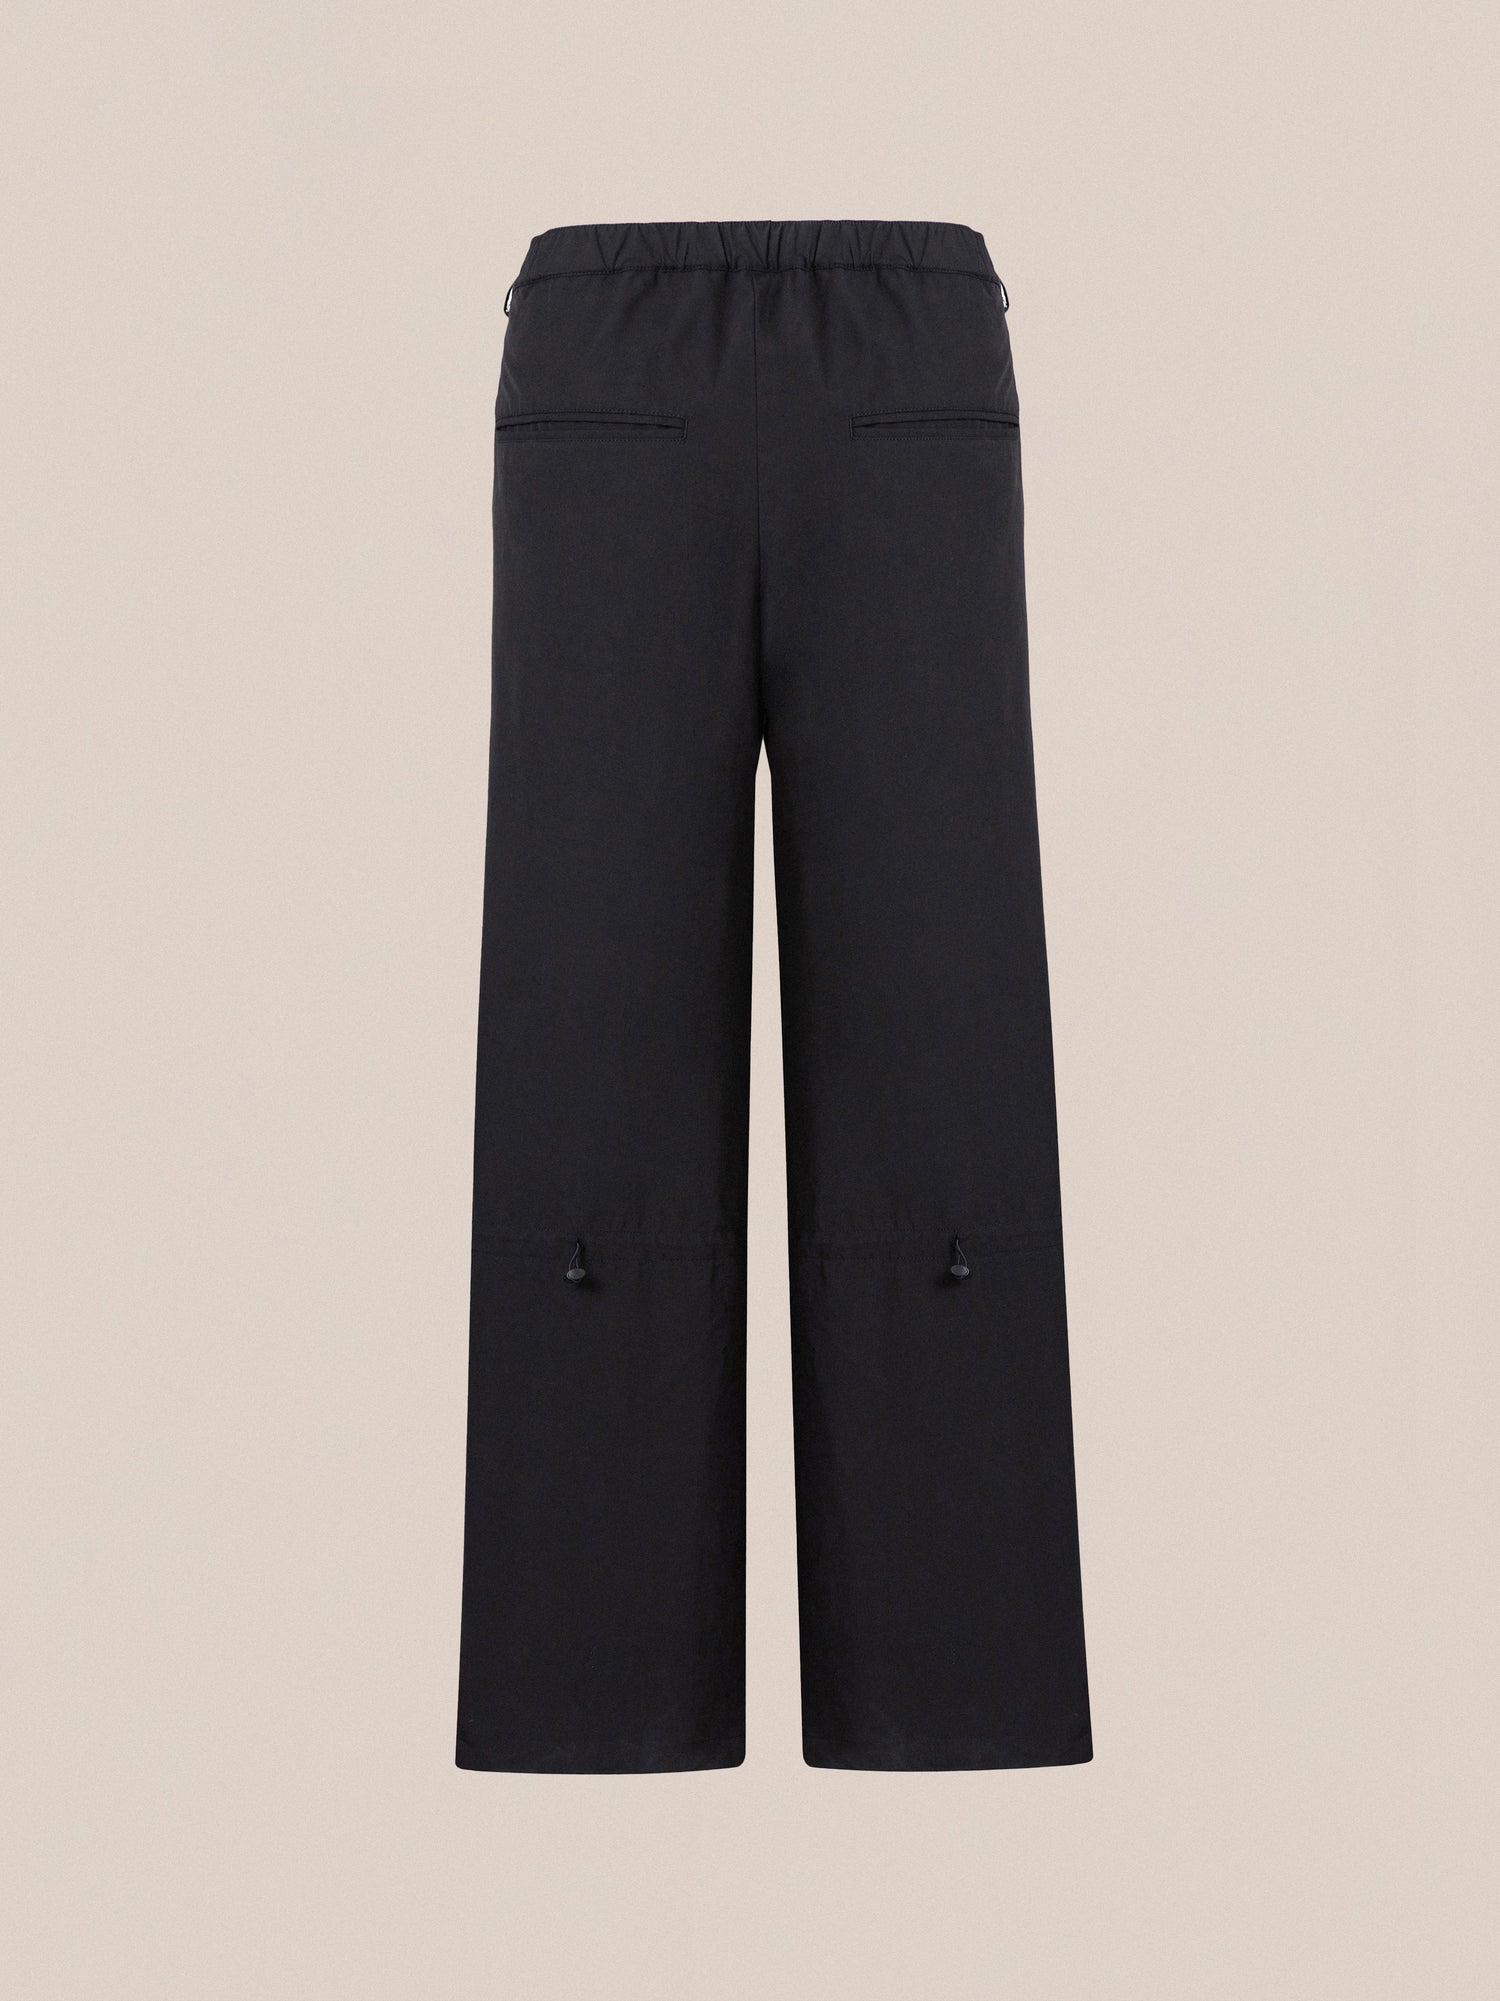 Black Tencel Pleated Pants with an elastic waistband and two side pockets, displayed against a beige background by Found.